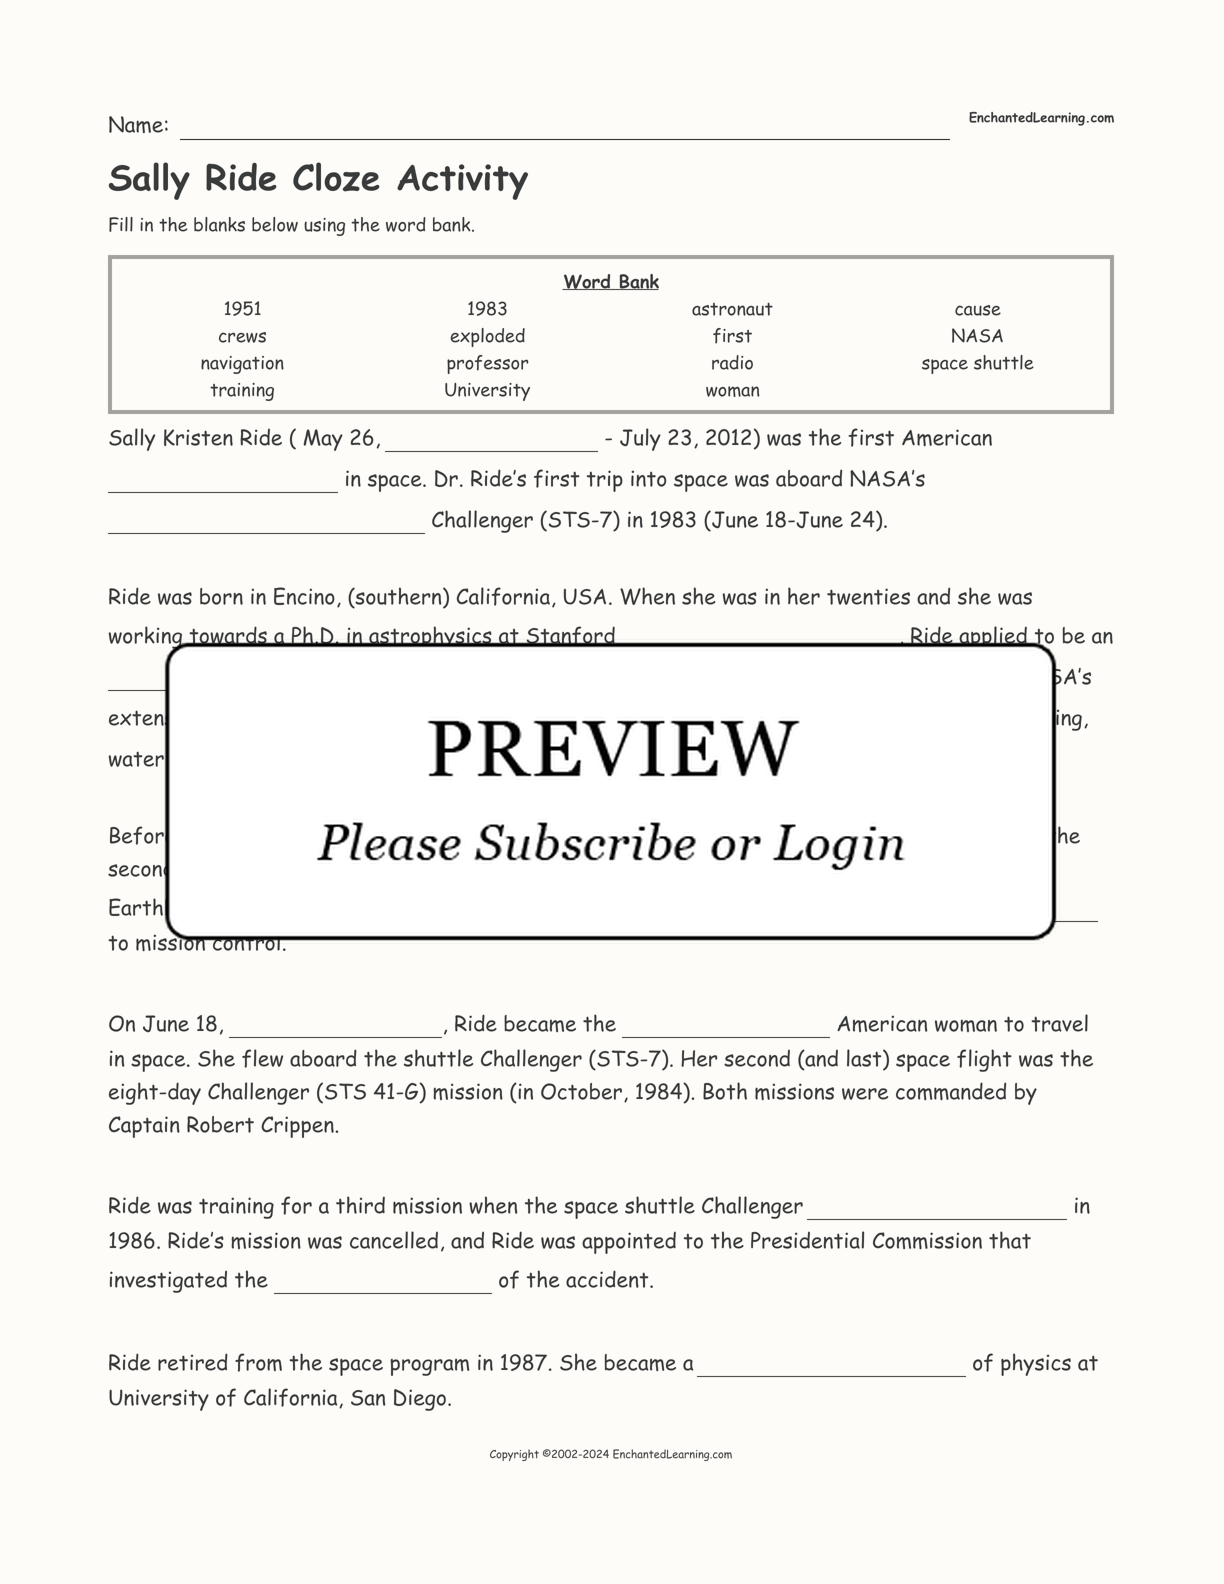 Sally Ride Cloze Activity interactive worksheet page 1